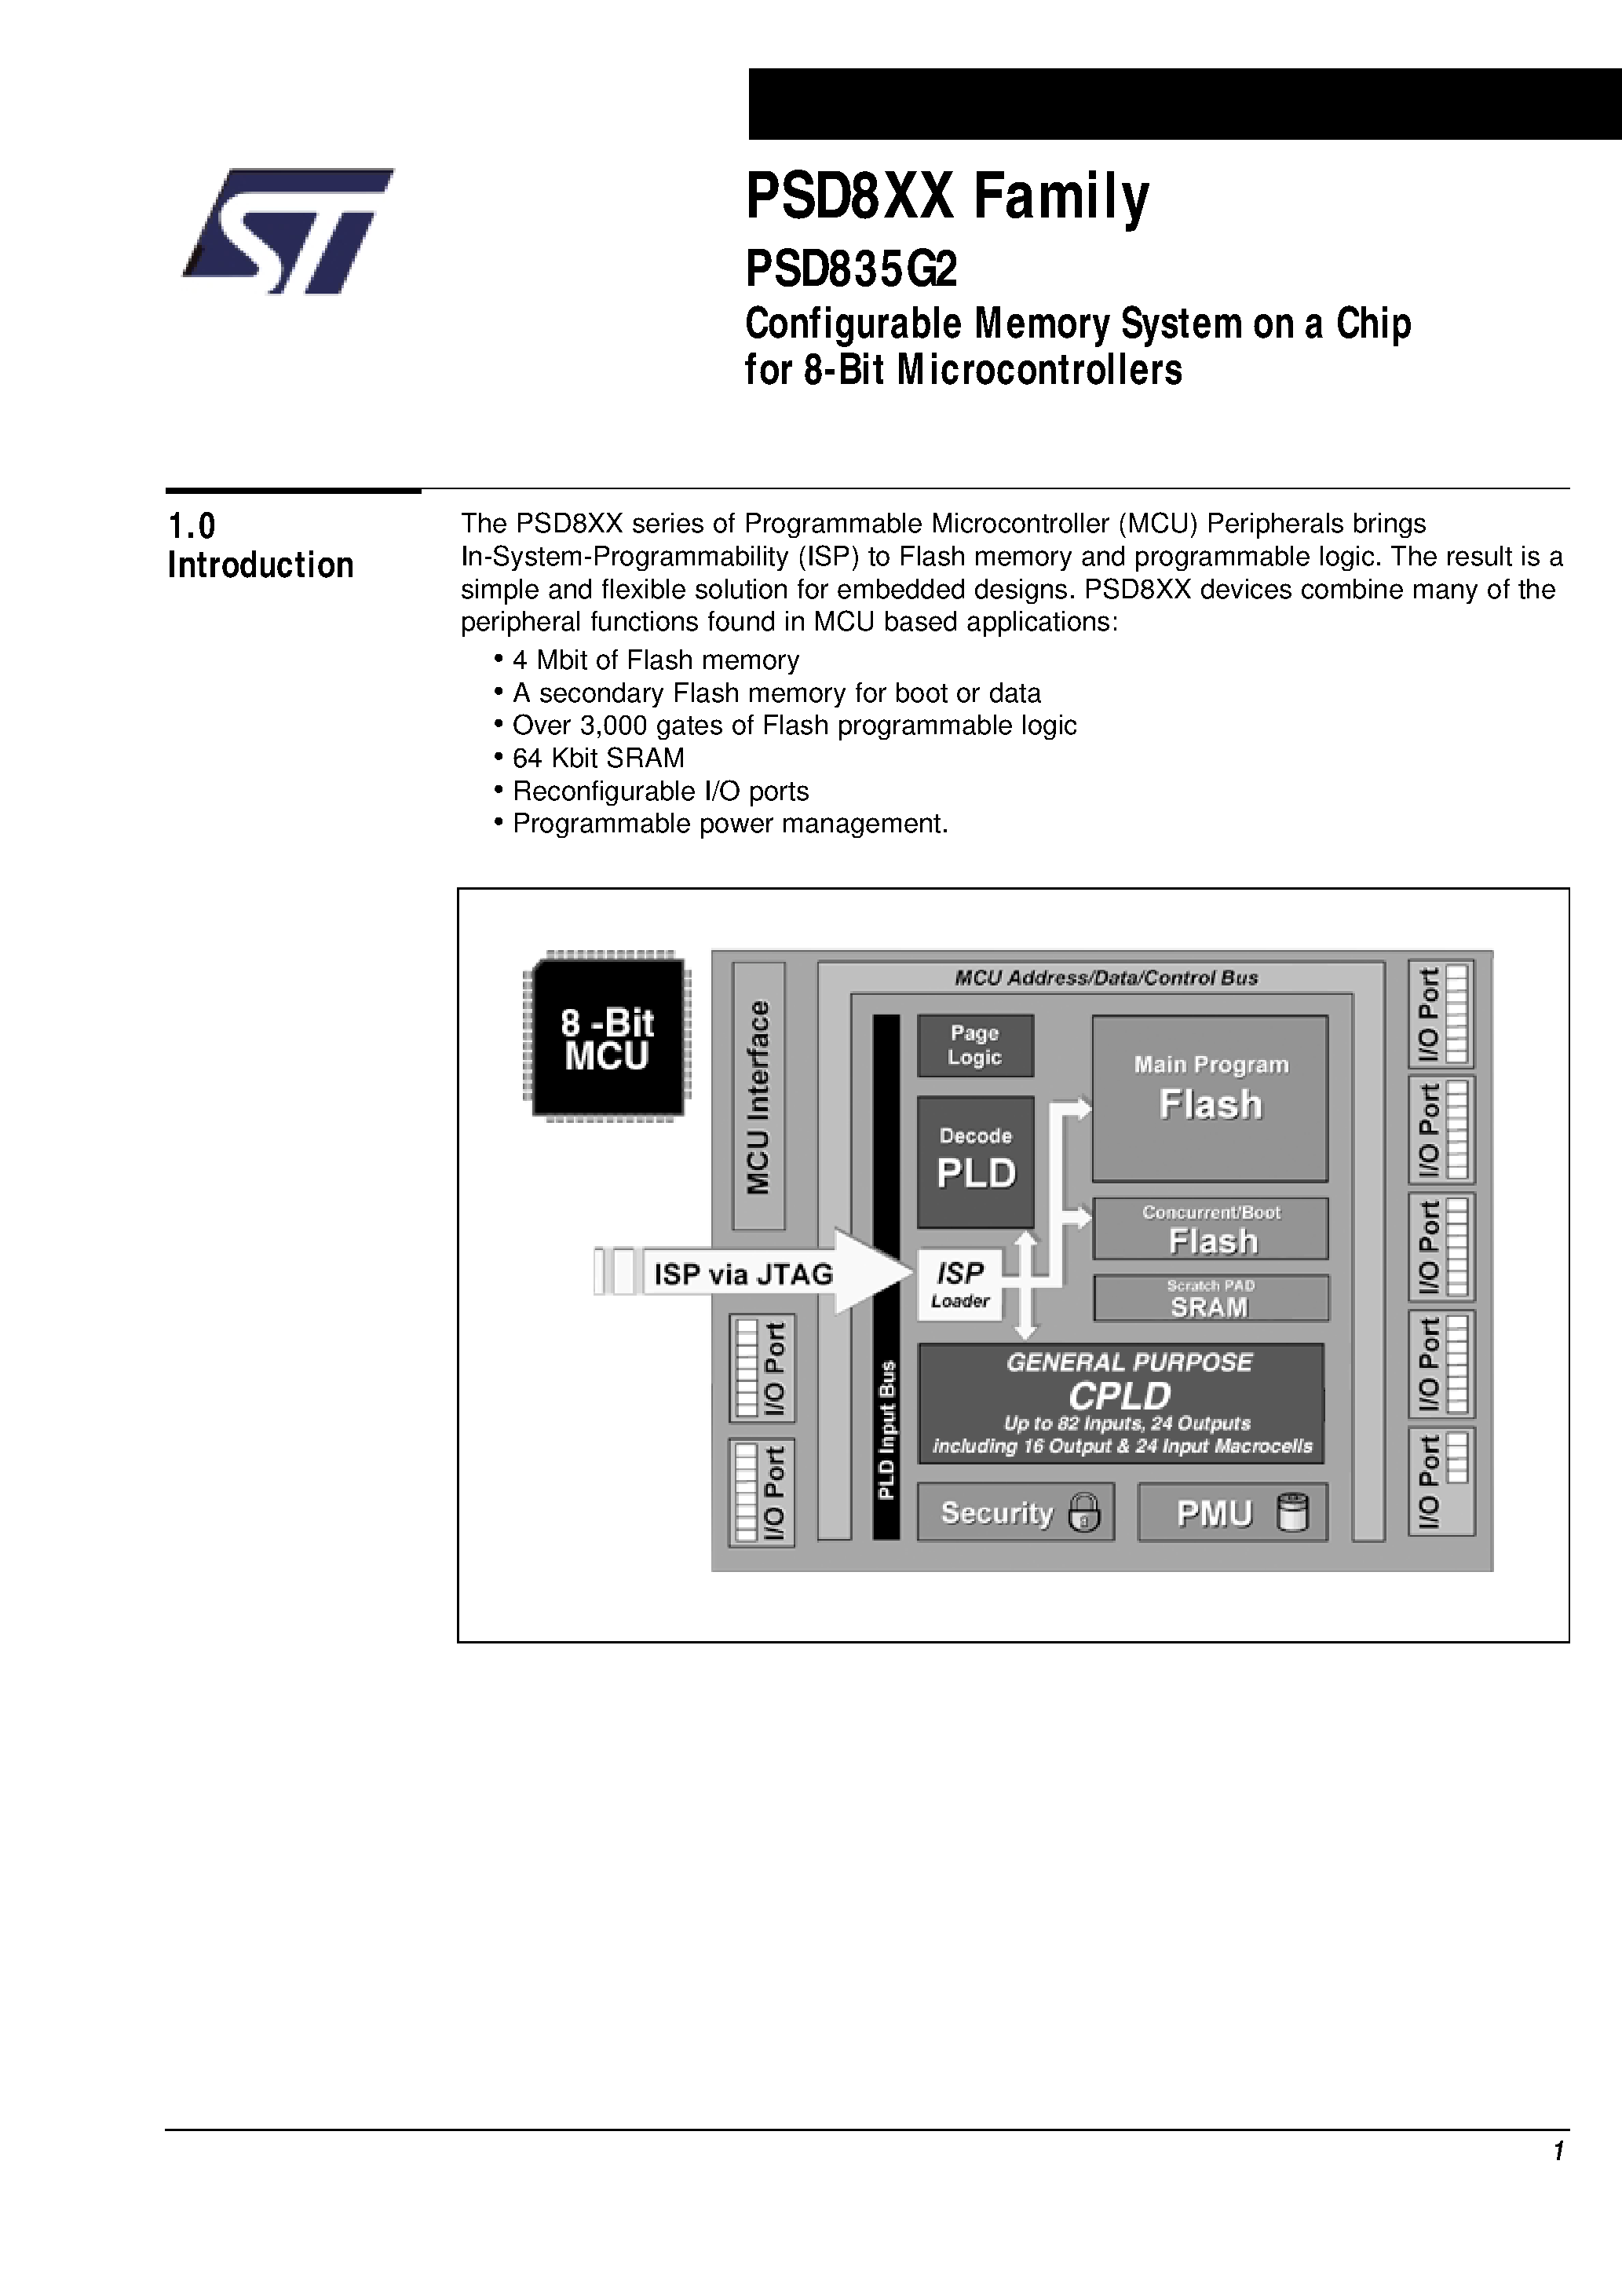 Datasheet PSD835F1V-A-12JI - Configurable Memory System on a Chip for 8-Bit Microcontrollers page 2